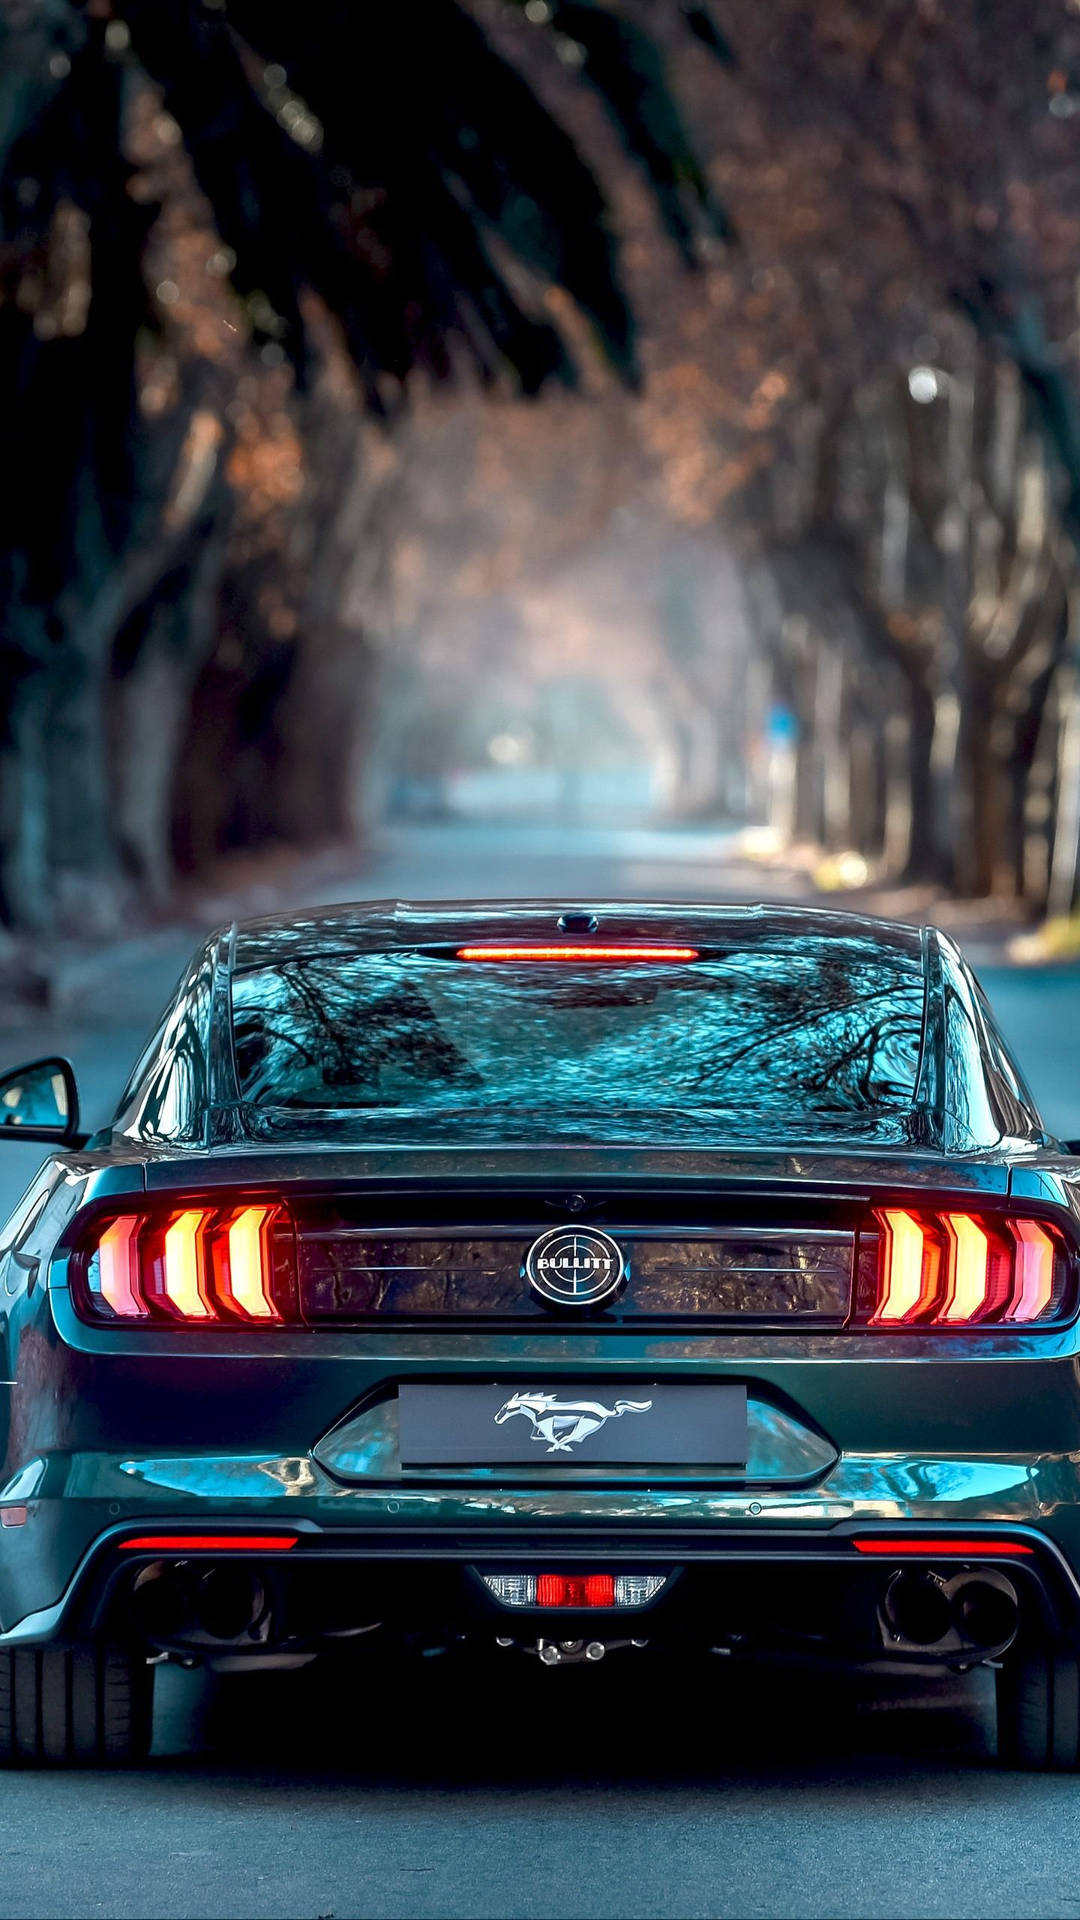 Iphone X Car Ford Mustang Background